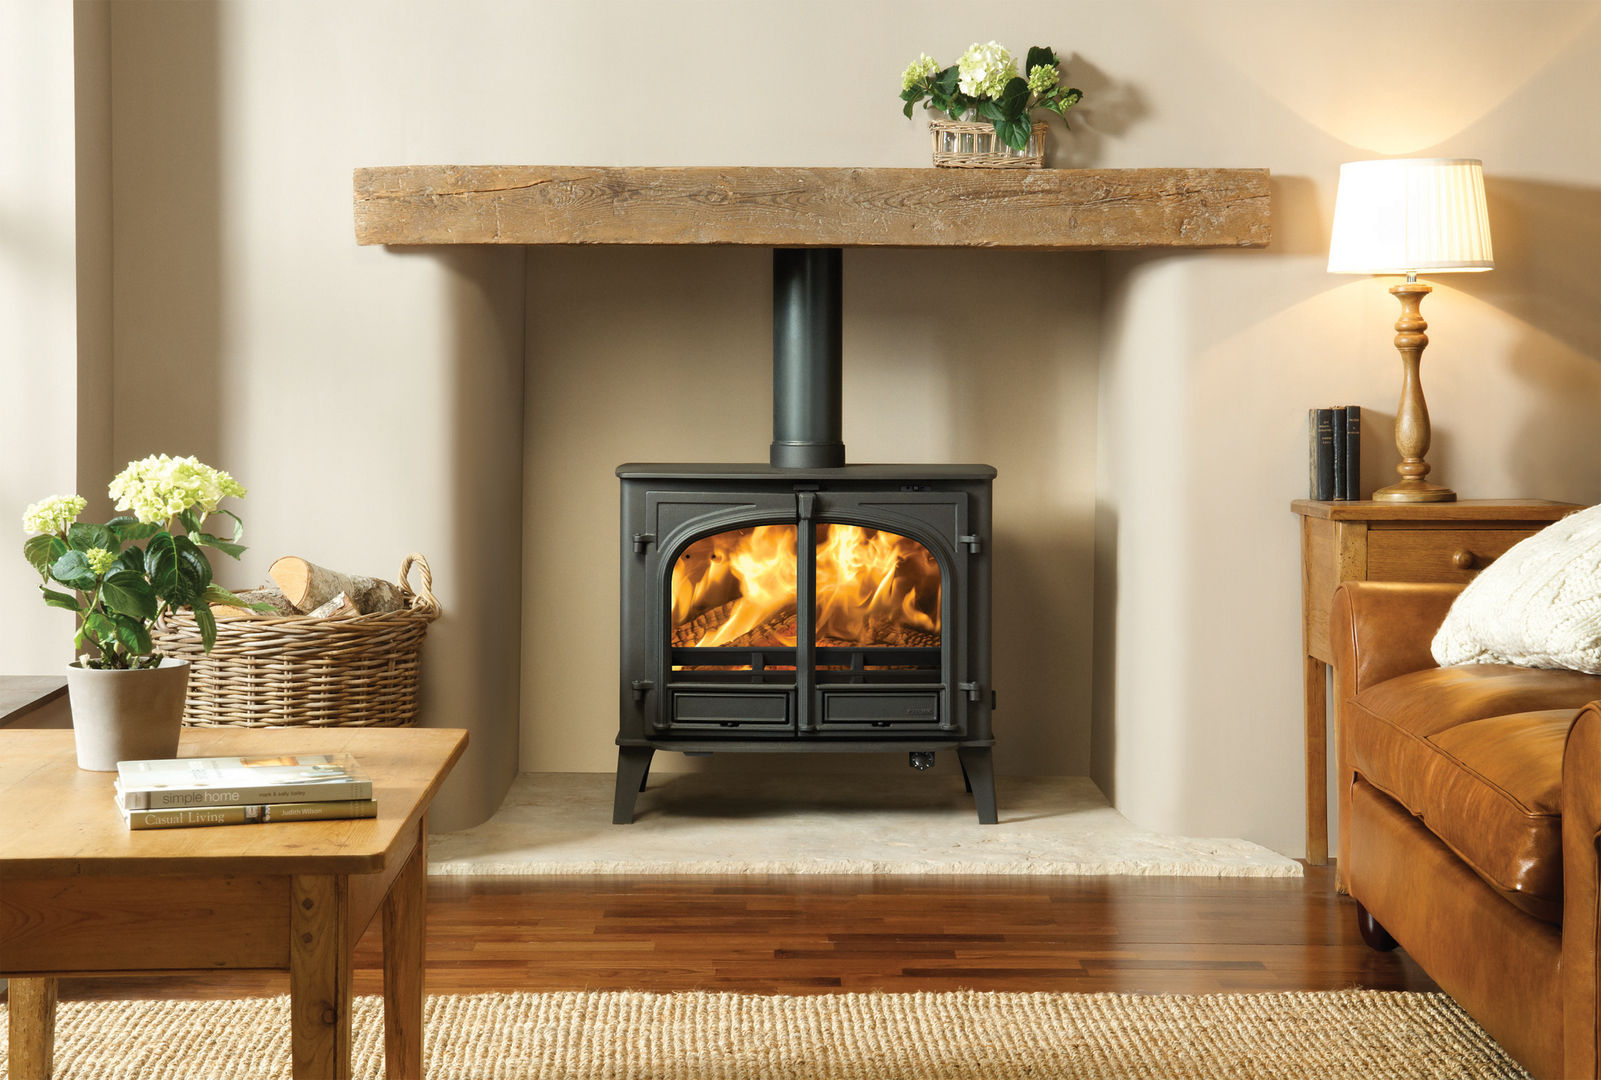 Stockton 14 Stovax Heating Group Living room Fireplaces & accessories